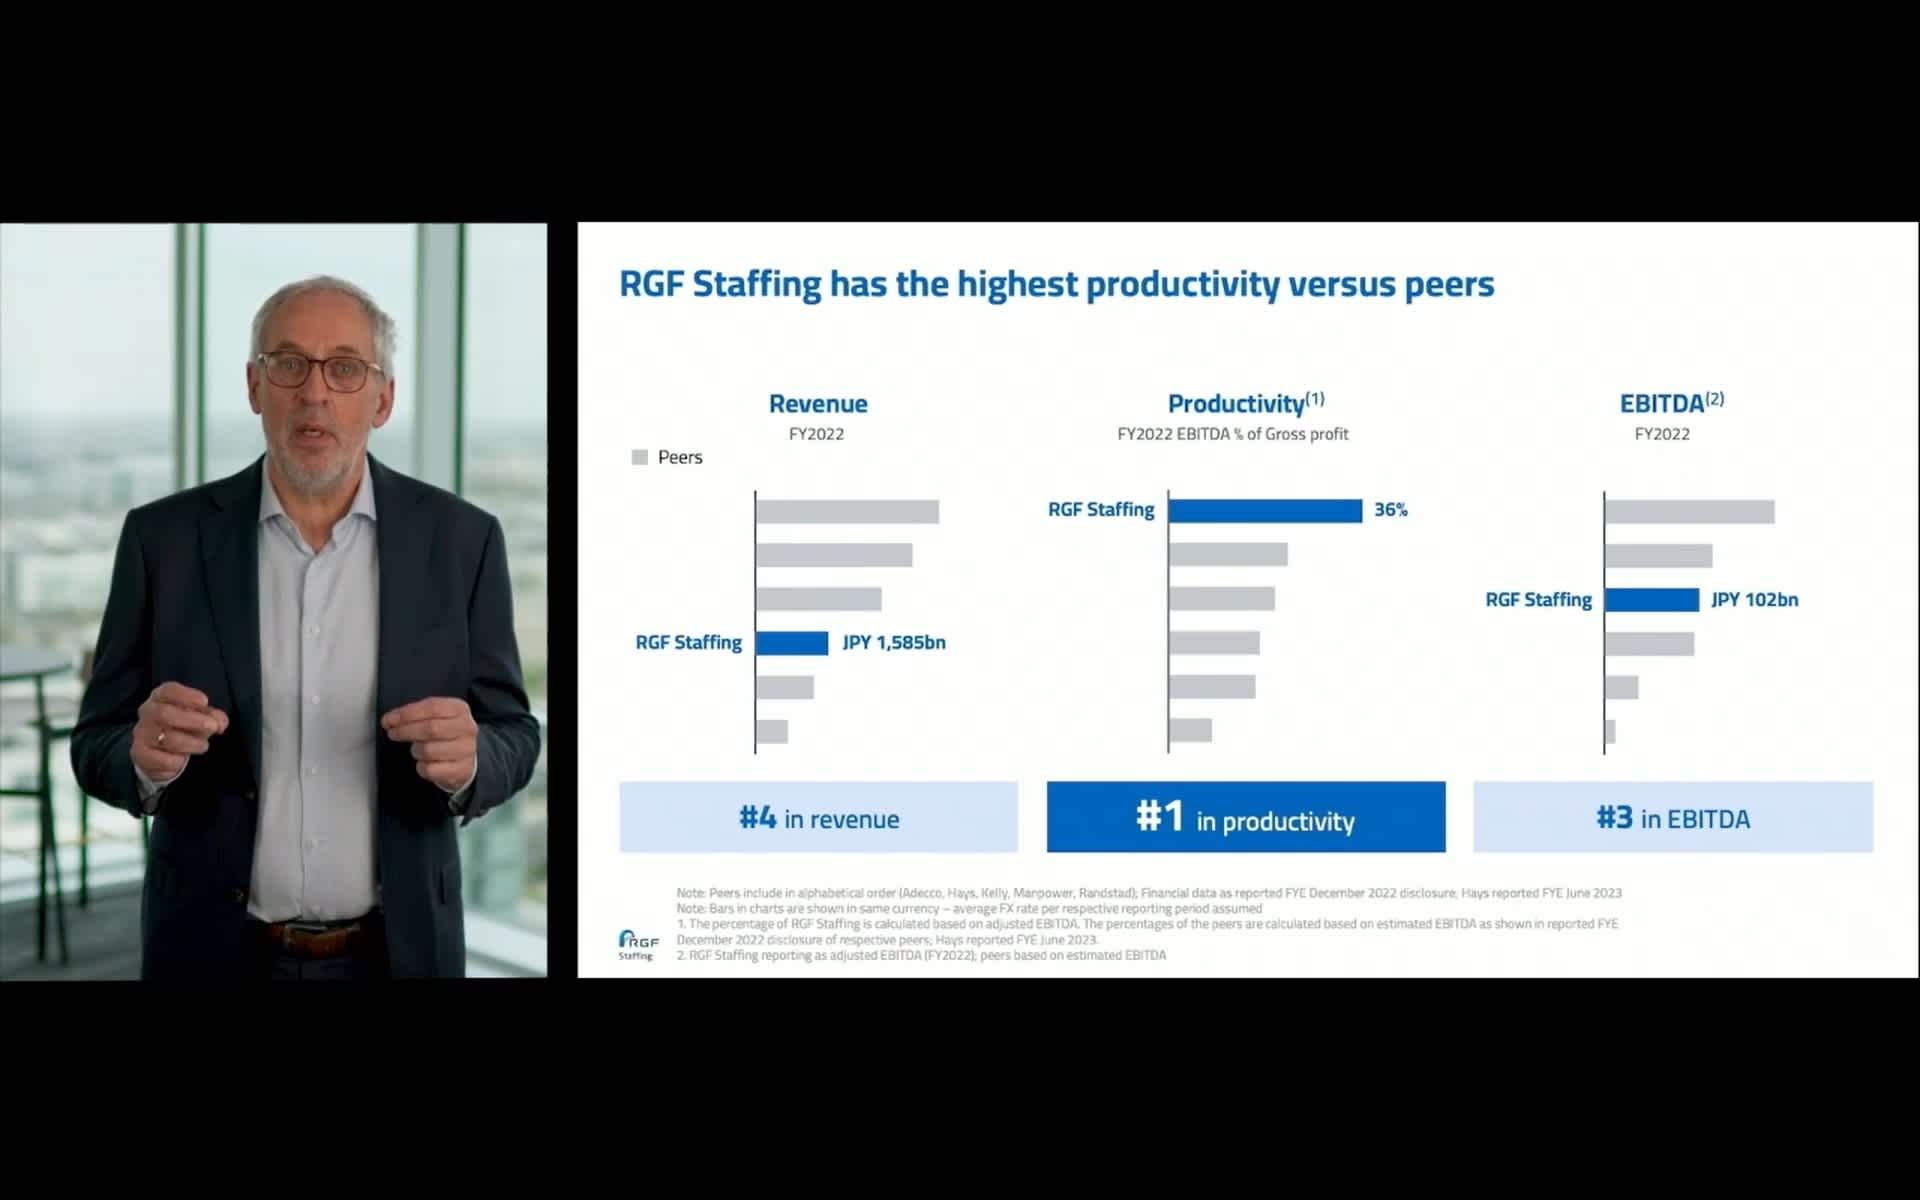 RGF Staffing CEO Rob Zandbergen presents the slide “RGF Staffing has the highest productivity versus peers”. In the presentation slide, RGF ranks number one in Productivity.